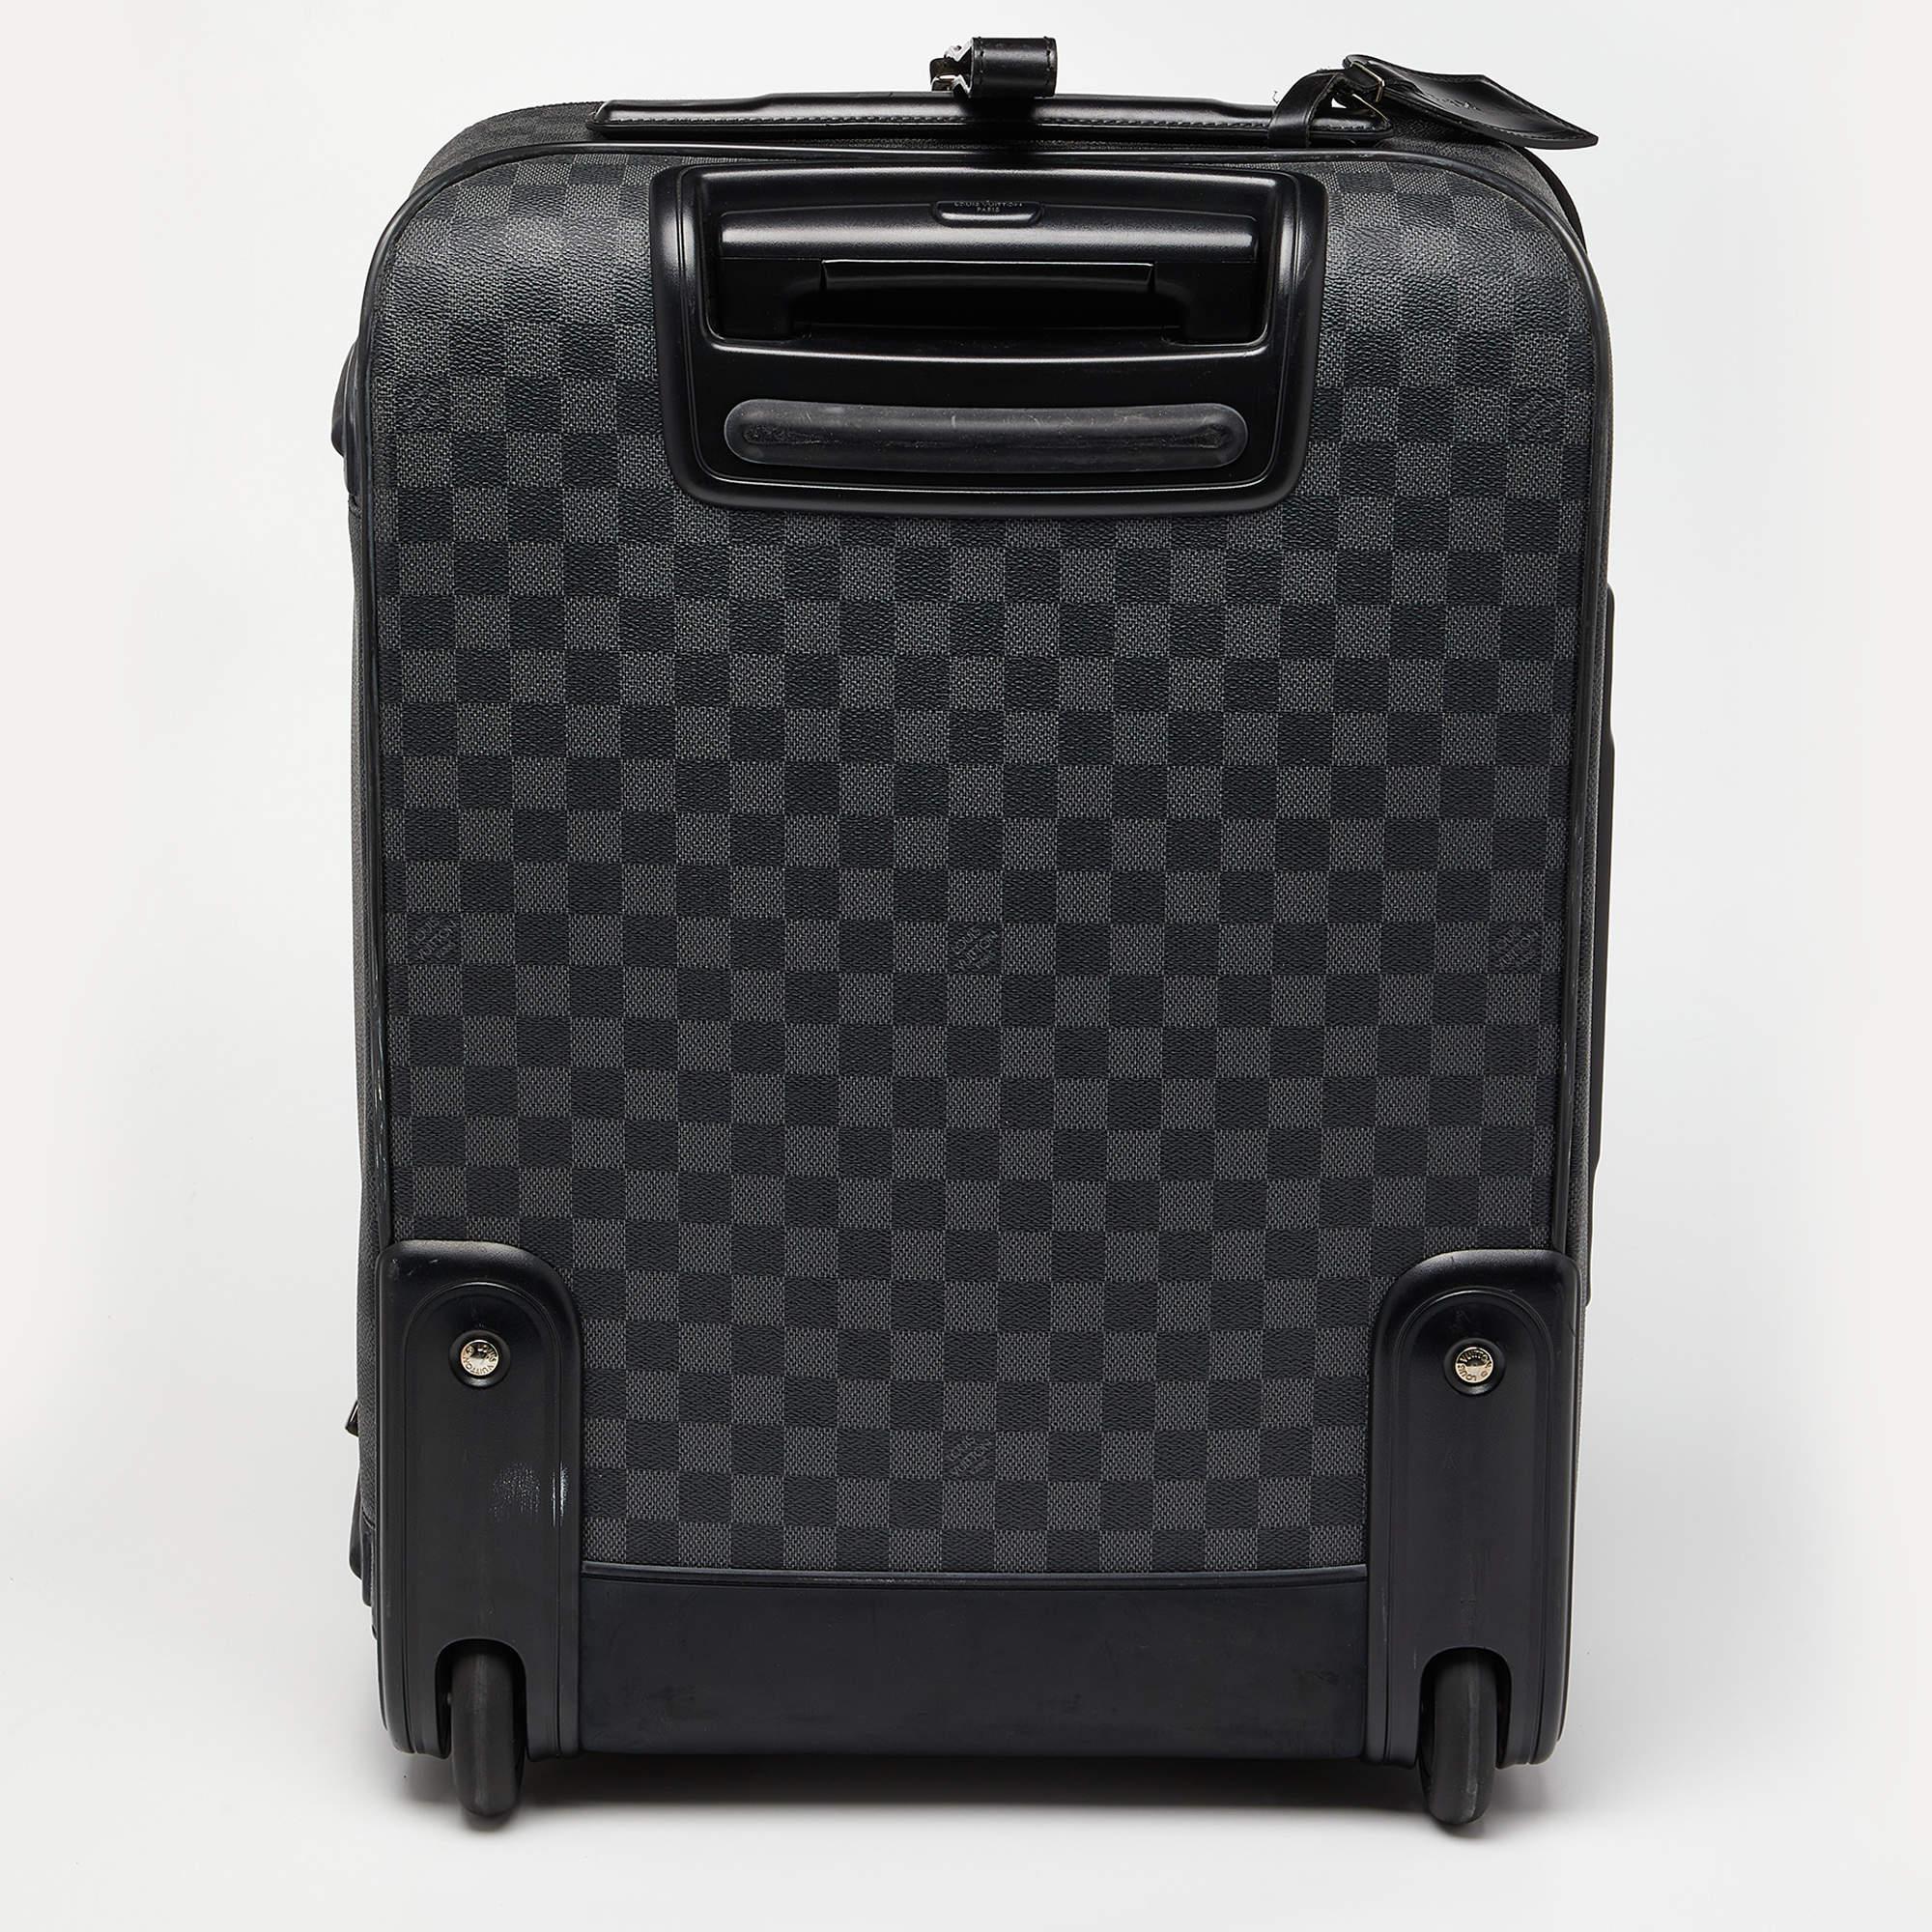 Louis Vuitton's bags are popular owing to their high style and functionality. This travel luggage bag, like all their designs, is durable and stylish. Exuding a fine finish, it is designed to give a luxurious experience.

Includes: Name Tag